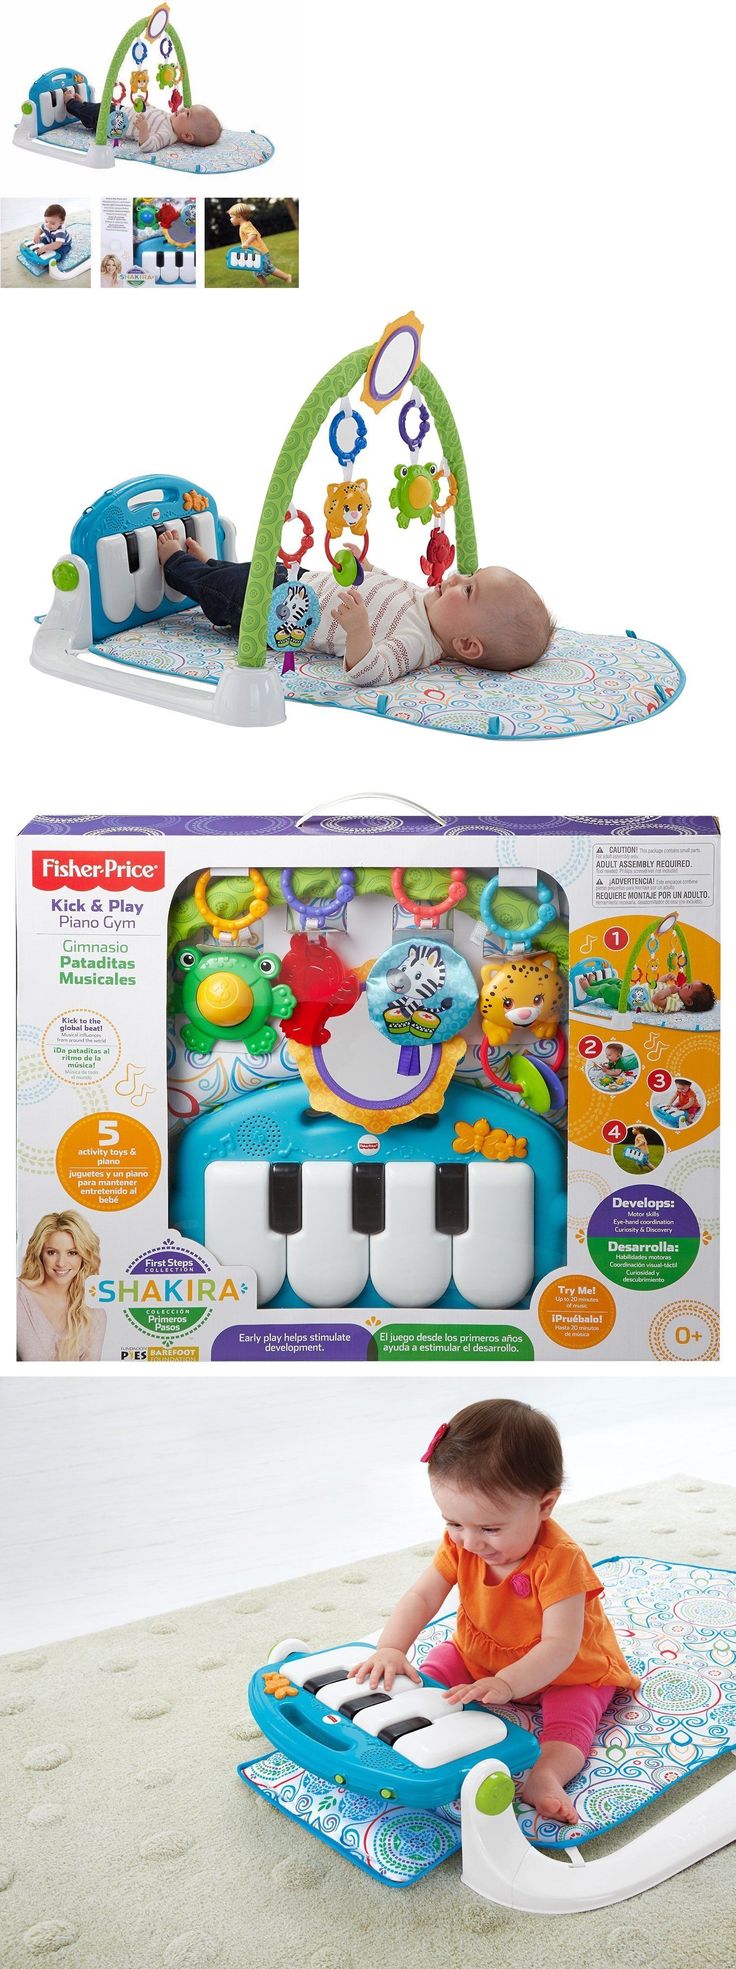 fisher price piano gym instructions